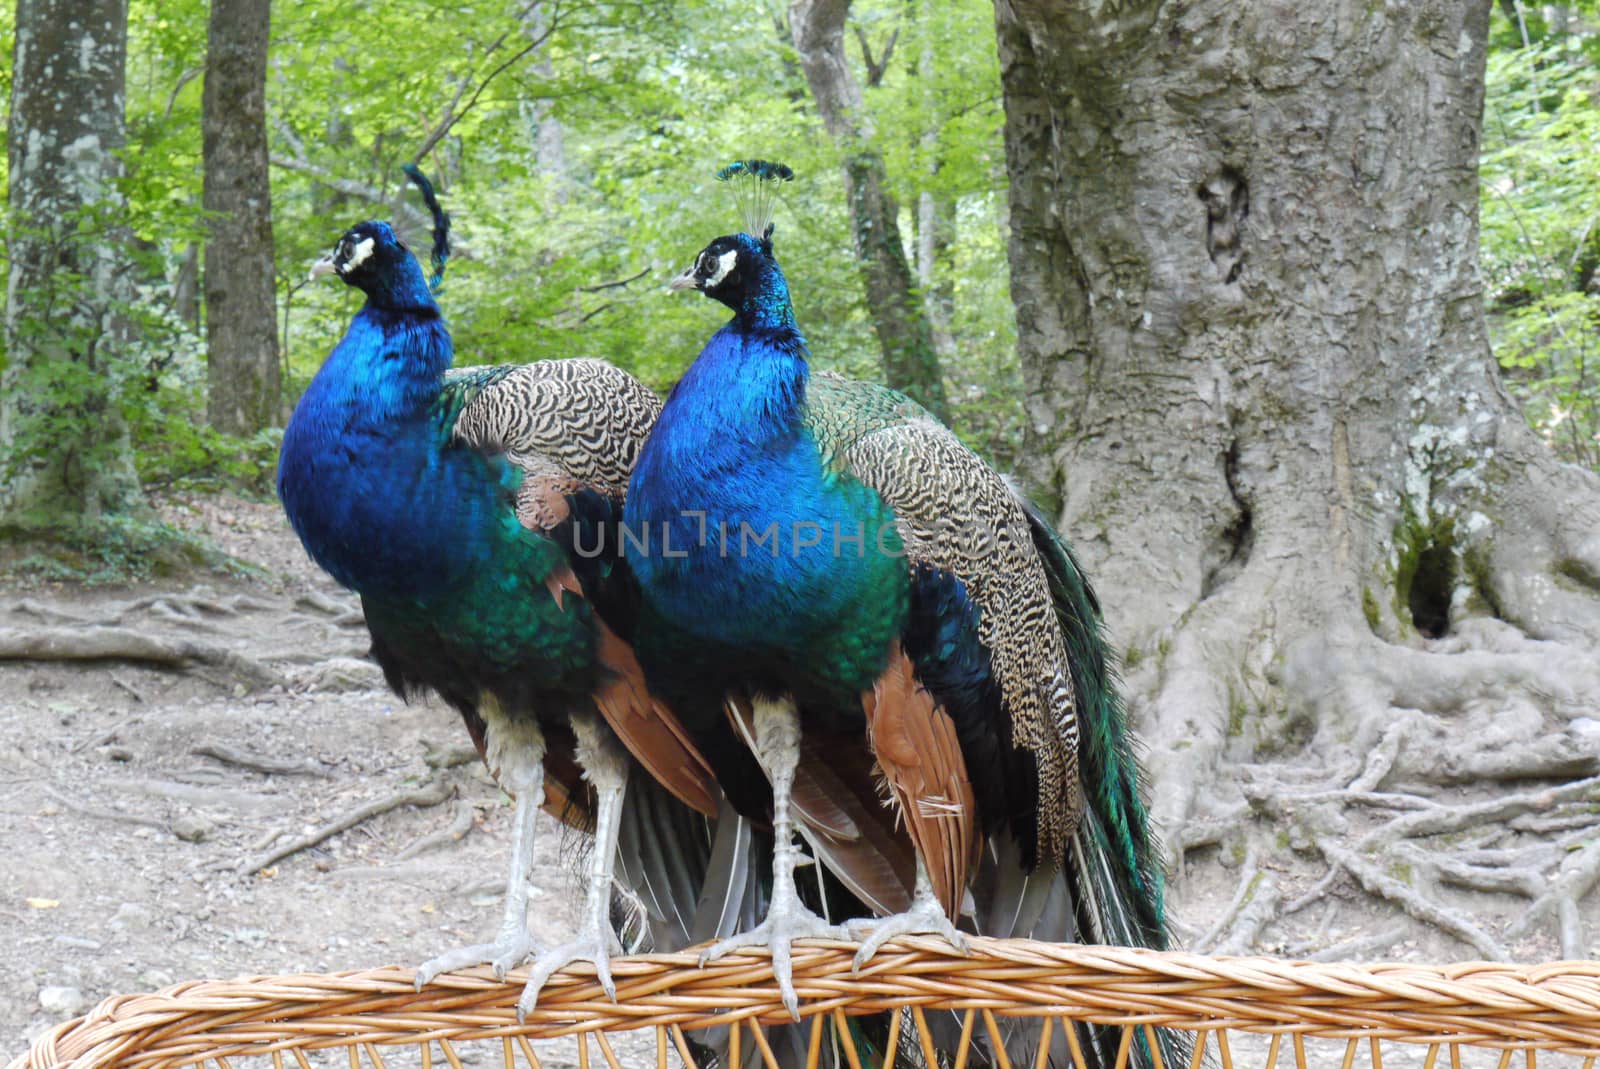 two beautiful blue-haired peacocks males sitting on a wicker basket in a park near a tree by Adamchuk